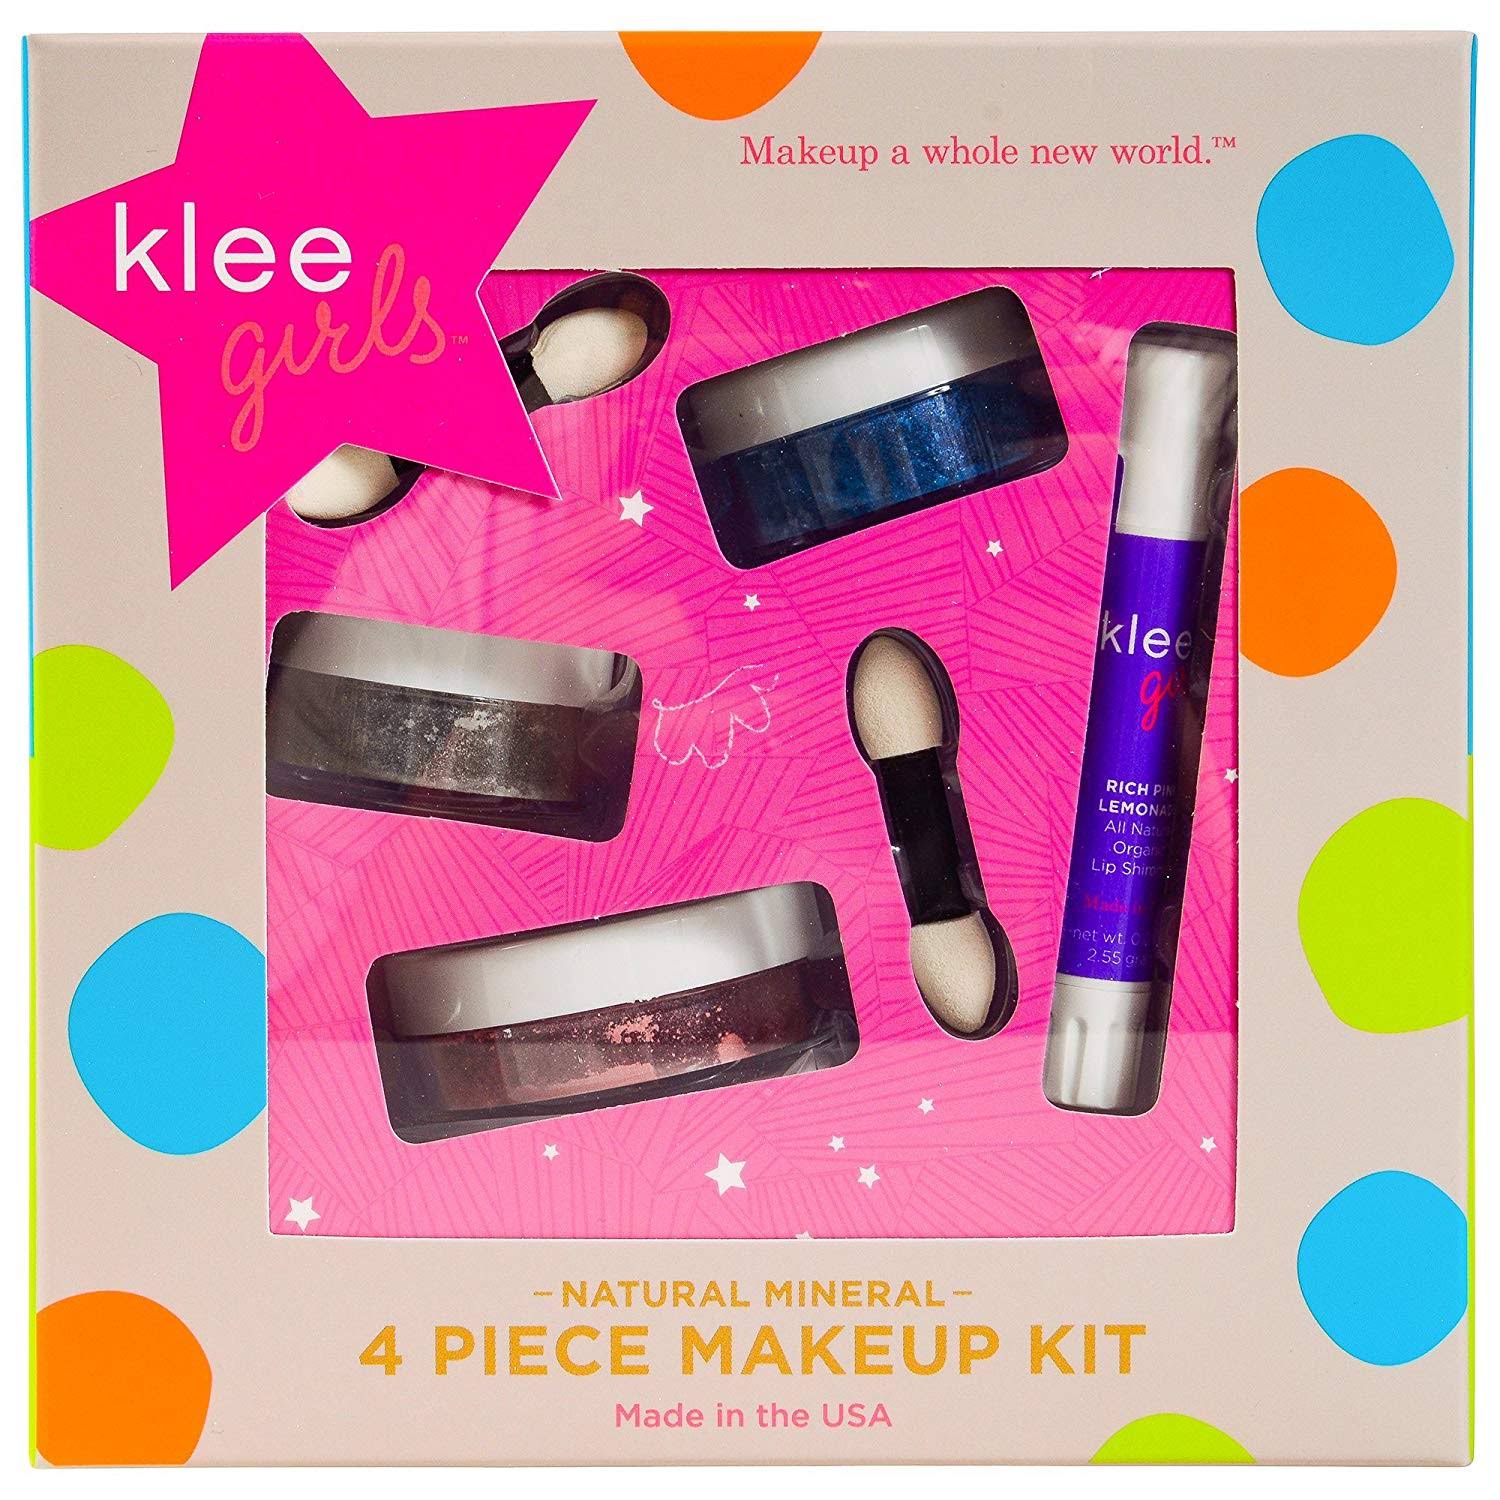 Luna Star Naturals Klee Girls 4-Piece Kit, Shining Through | Makeup | Best Price Guarantee | Free Shipping On All Orders